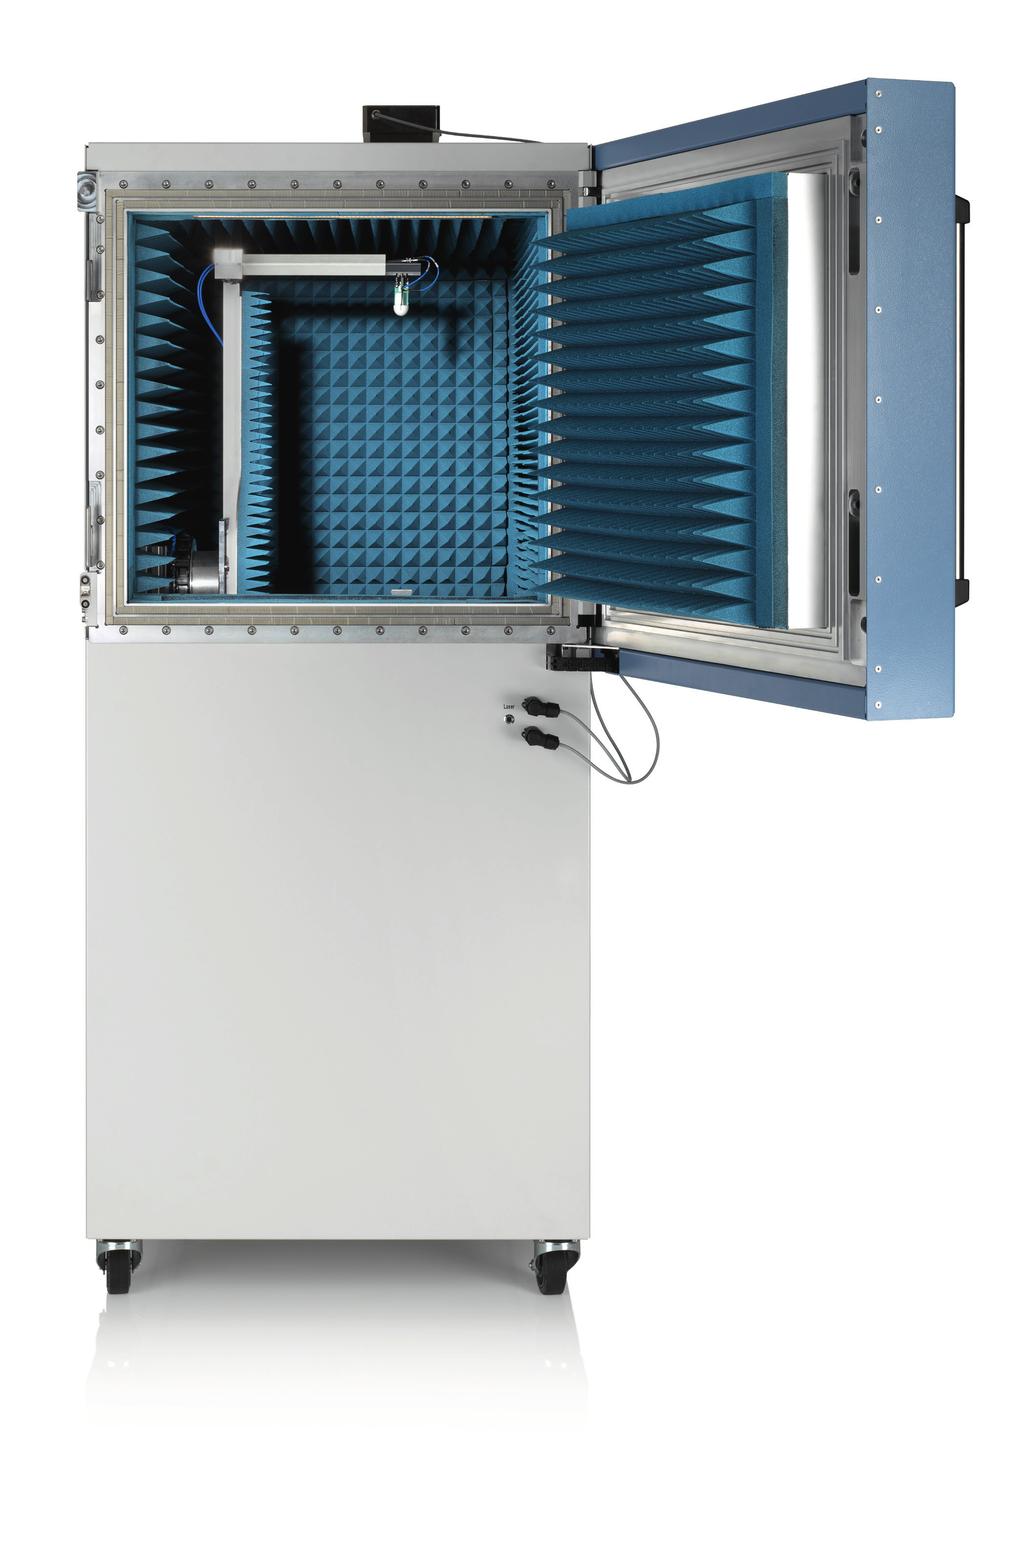 Designed for maximum compactness and mobility The compact and versatile design of the R&S ATS1000 fits into any lab ensuring a small footprint of around 1.3 m2.